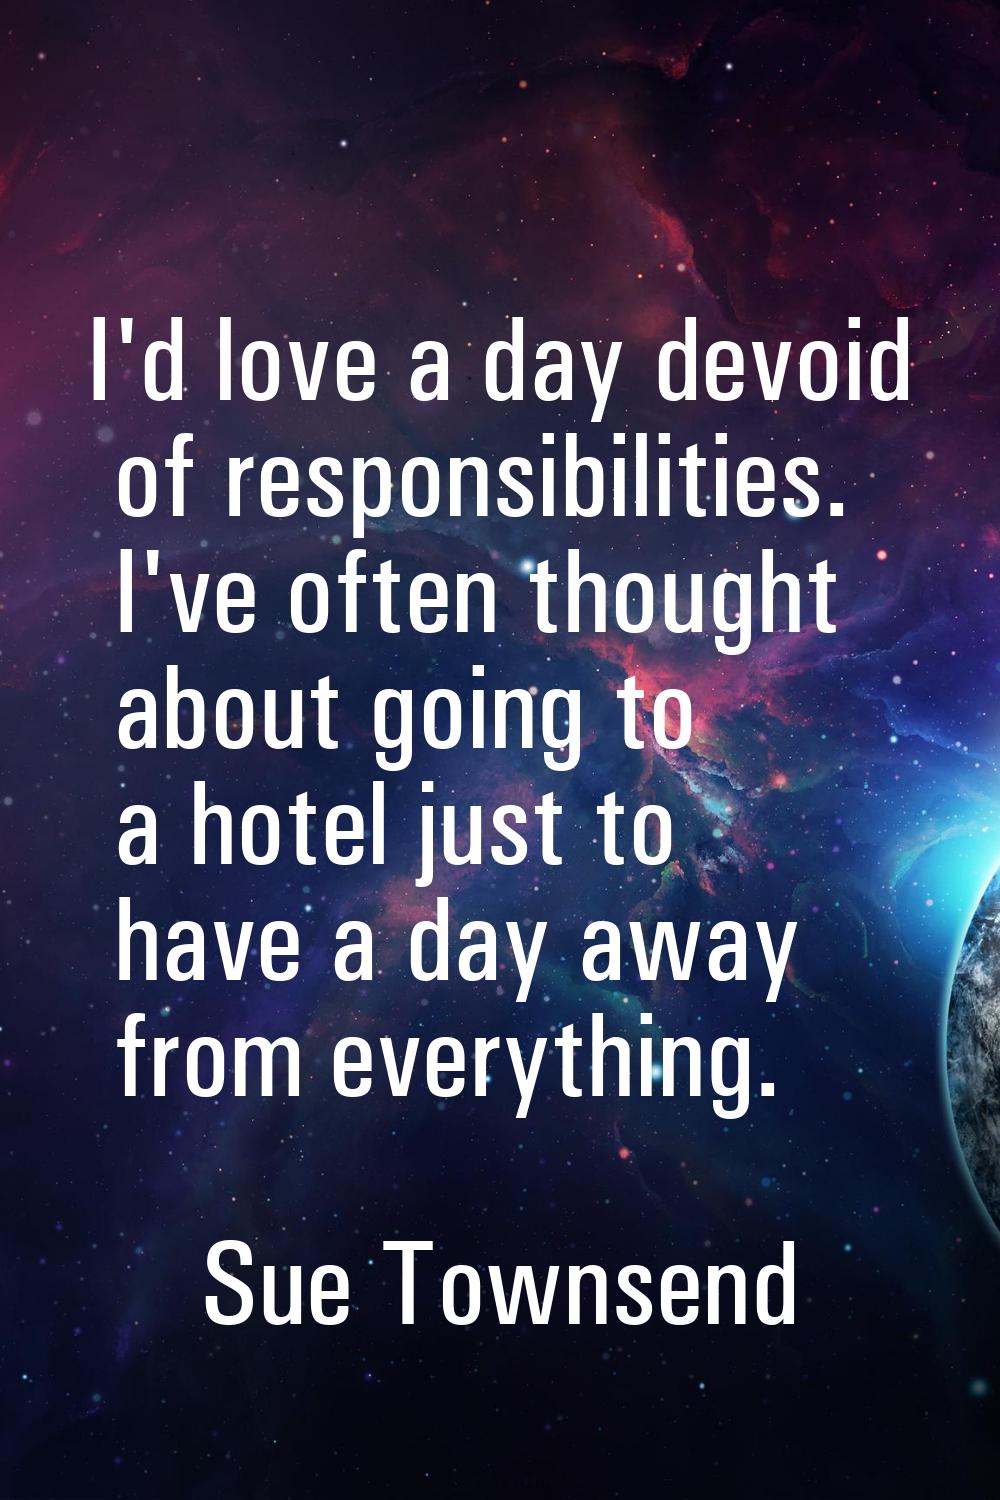 I'd love a day devoid of responsibilities. I've often thought about going to a hotel just to have a